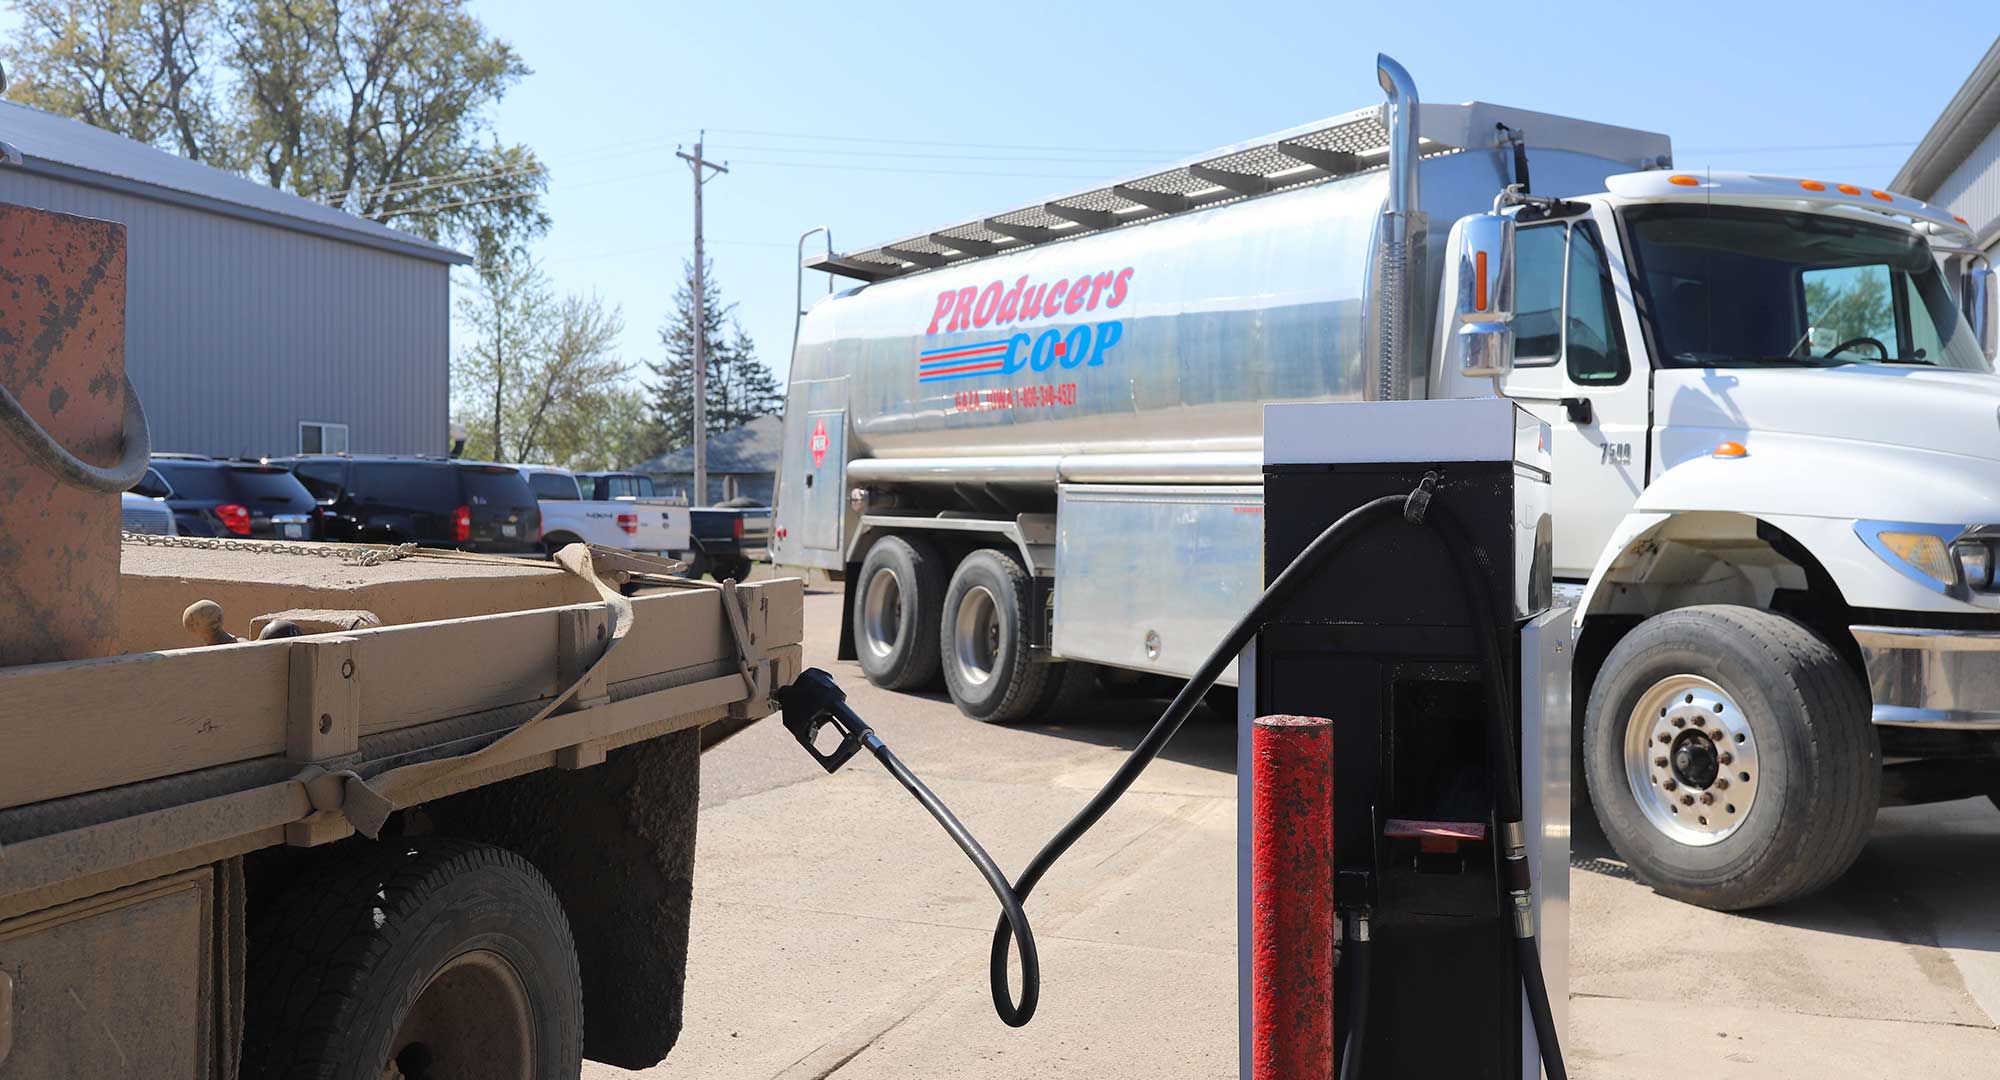 Producers Coop fuel services in Northwest Iowa.